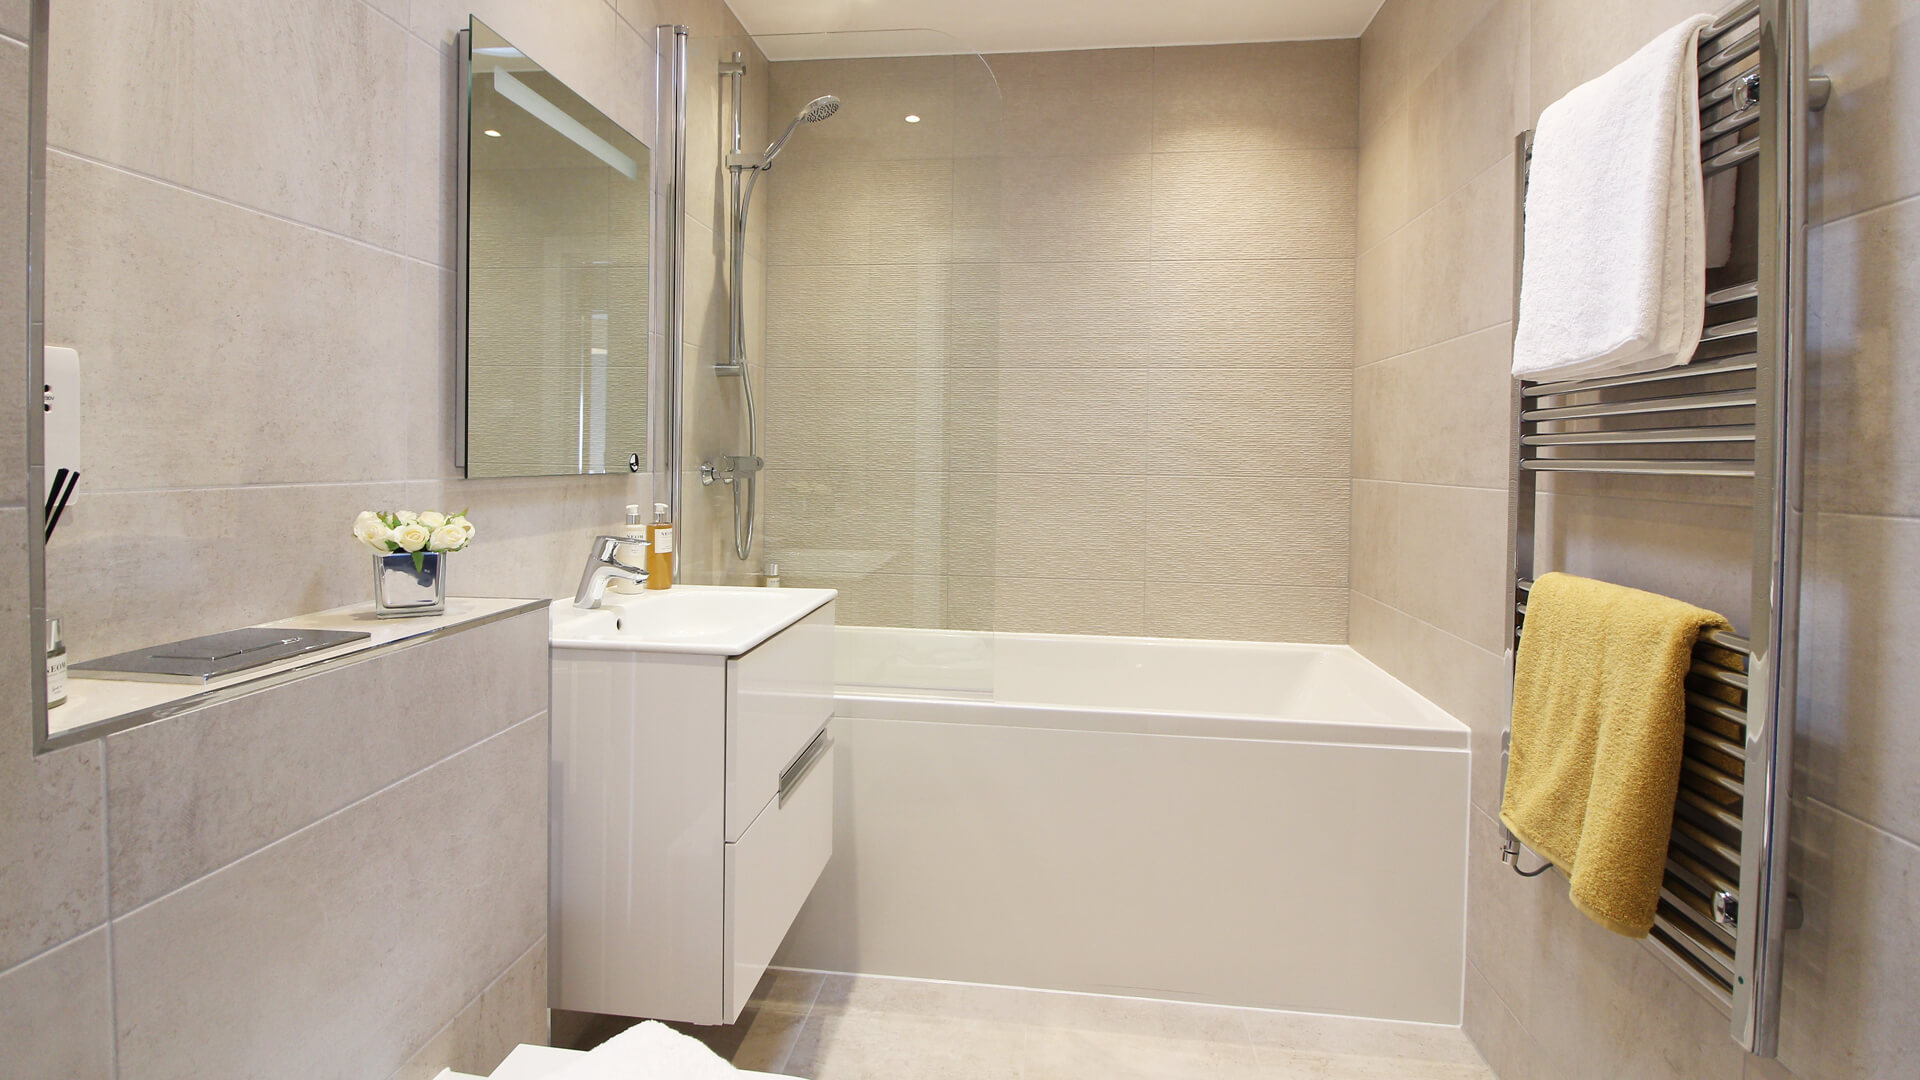 Fitted bathroom at our Mulberry place development.